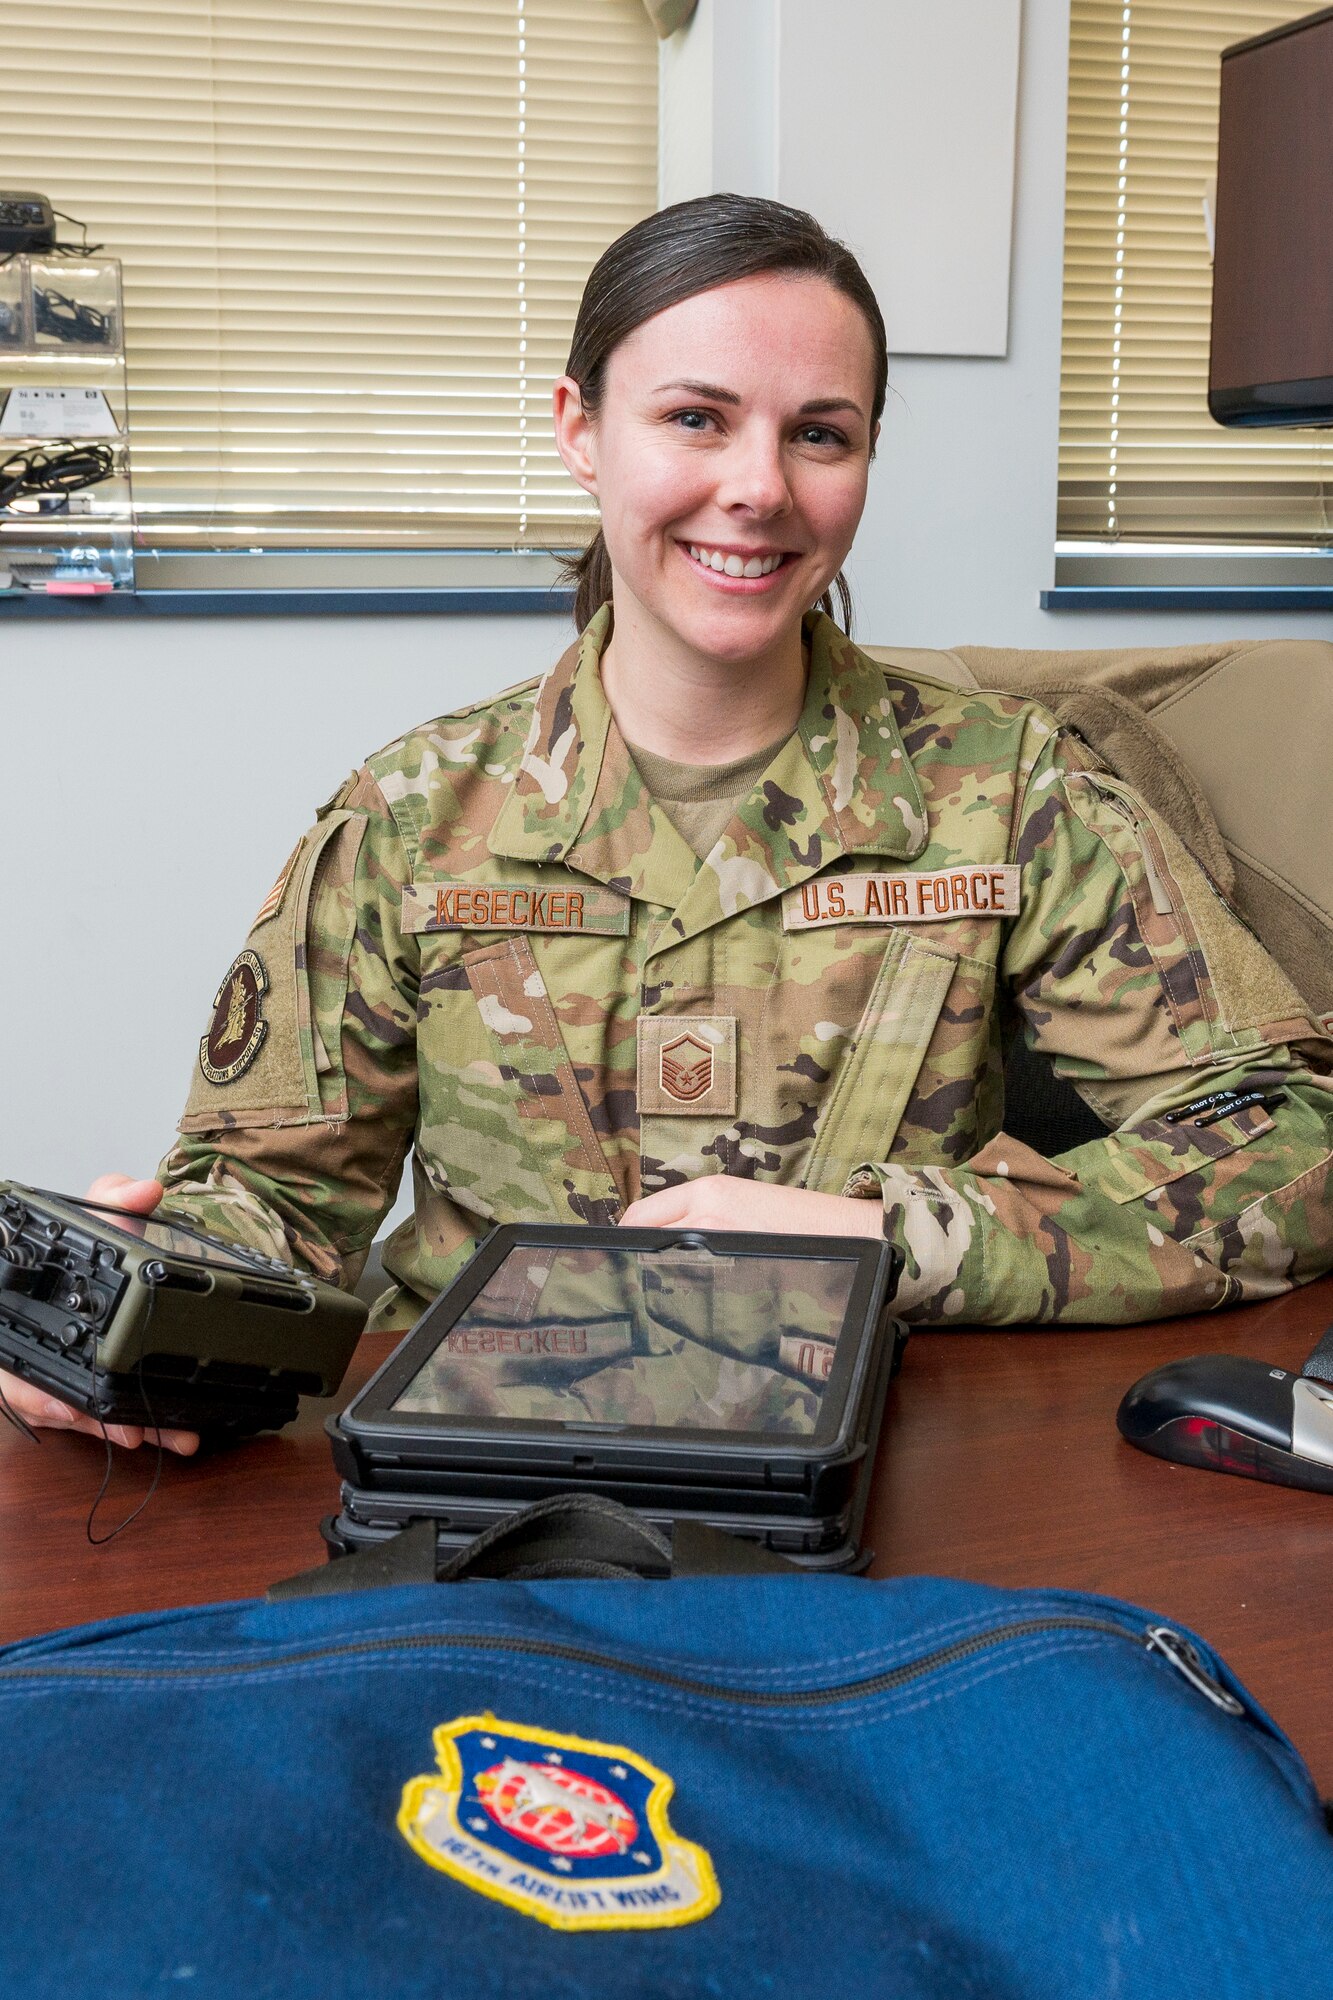 U.S. Air Force Master Sgt. Samantha Kesecker is a cyber surety craftsman for the 167th Operations Group and the 167th Airlift Wing Airman Spotlight for January 2023.